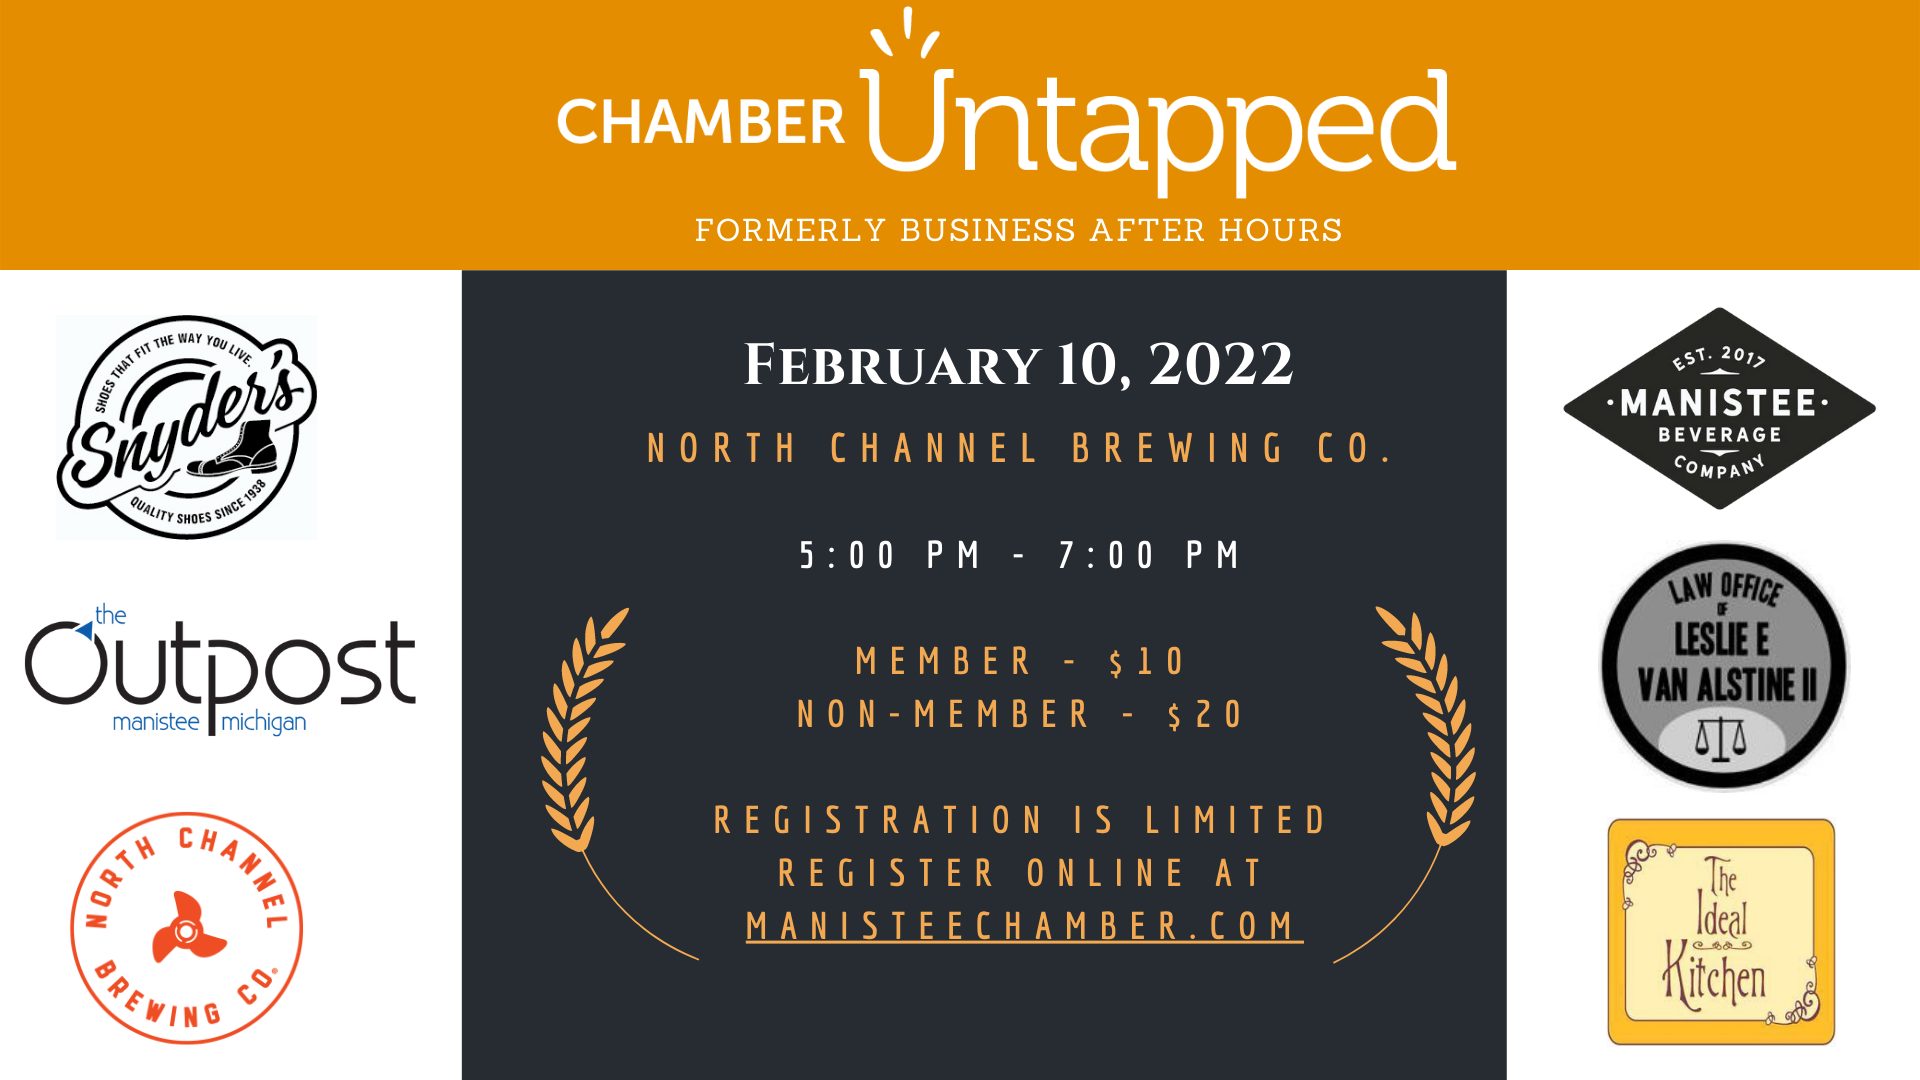 North Channel Brewing Co. 500 Pm - 700 PM Member - $10 Non-Member - $20 REgistration is limited Register online at MAnisteechamber.com